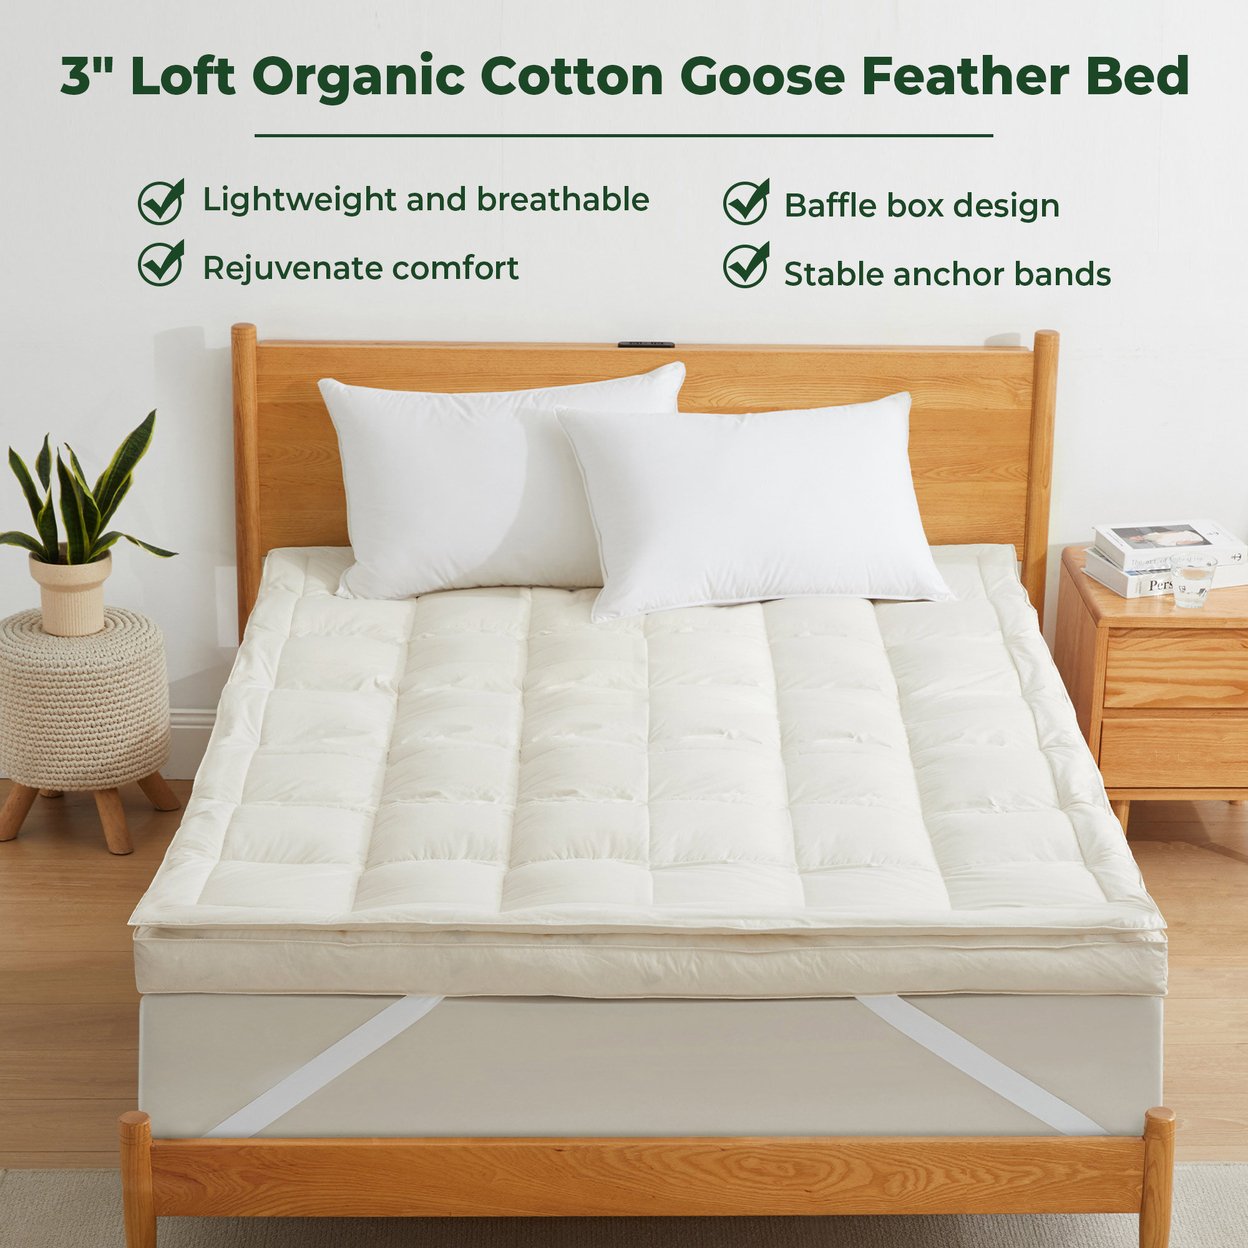 Premium White Goose Feather Mattress Topper, 3 Soft Feather Bed, 300 TC Organic Cotton Cover, Eco-friendly And Breathable - King, White